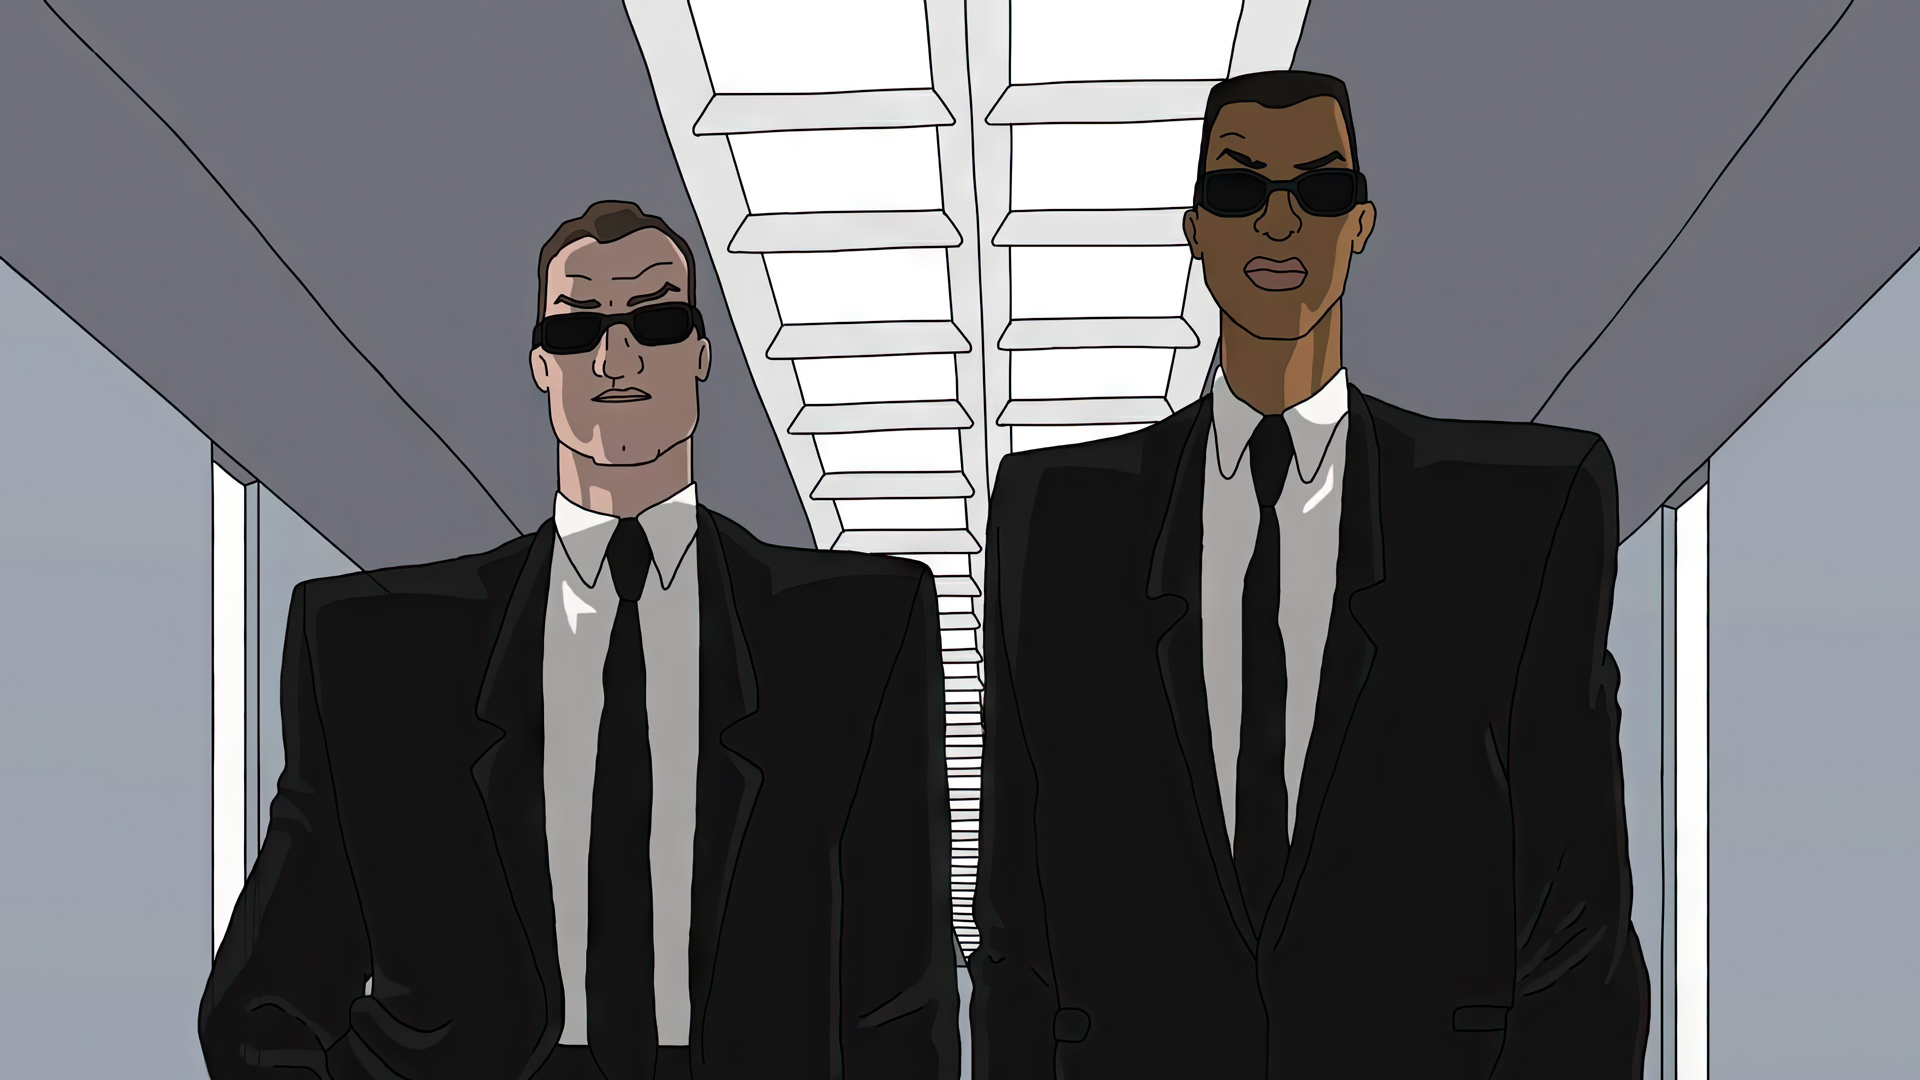 Men In Black Animated Series Cartoon Animation Agent K Agent J Suit And Tie Sunglasses 1920x1080